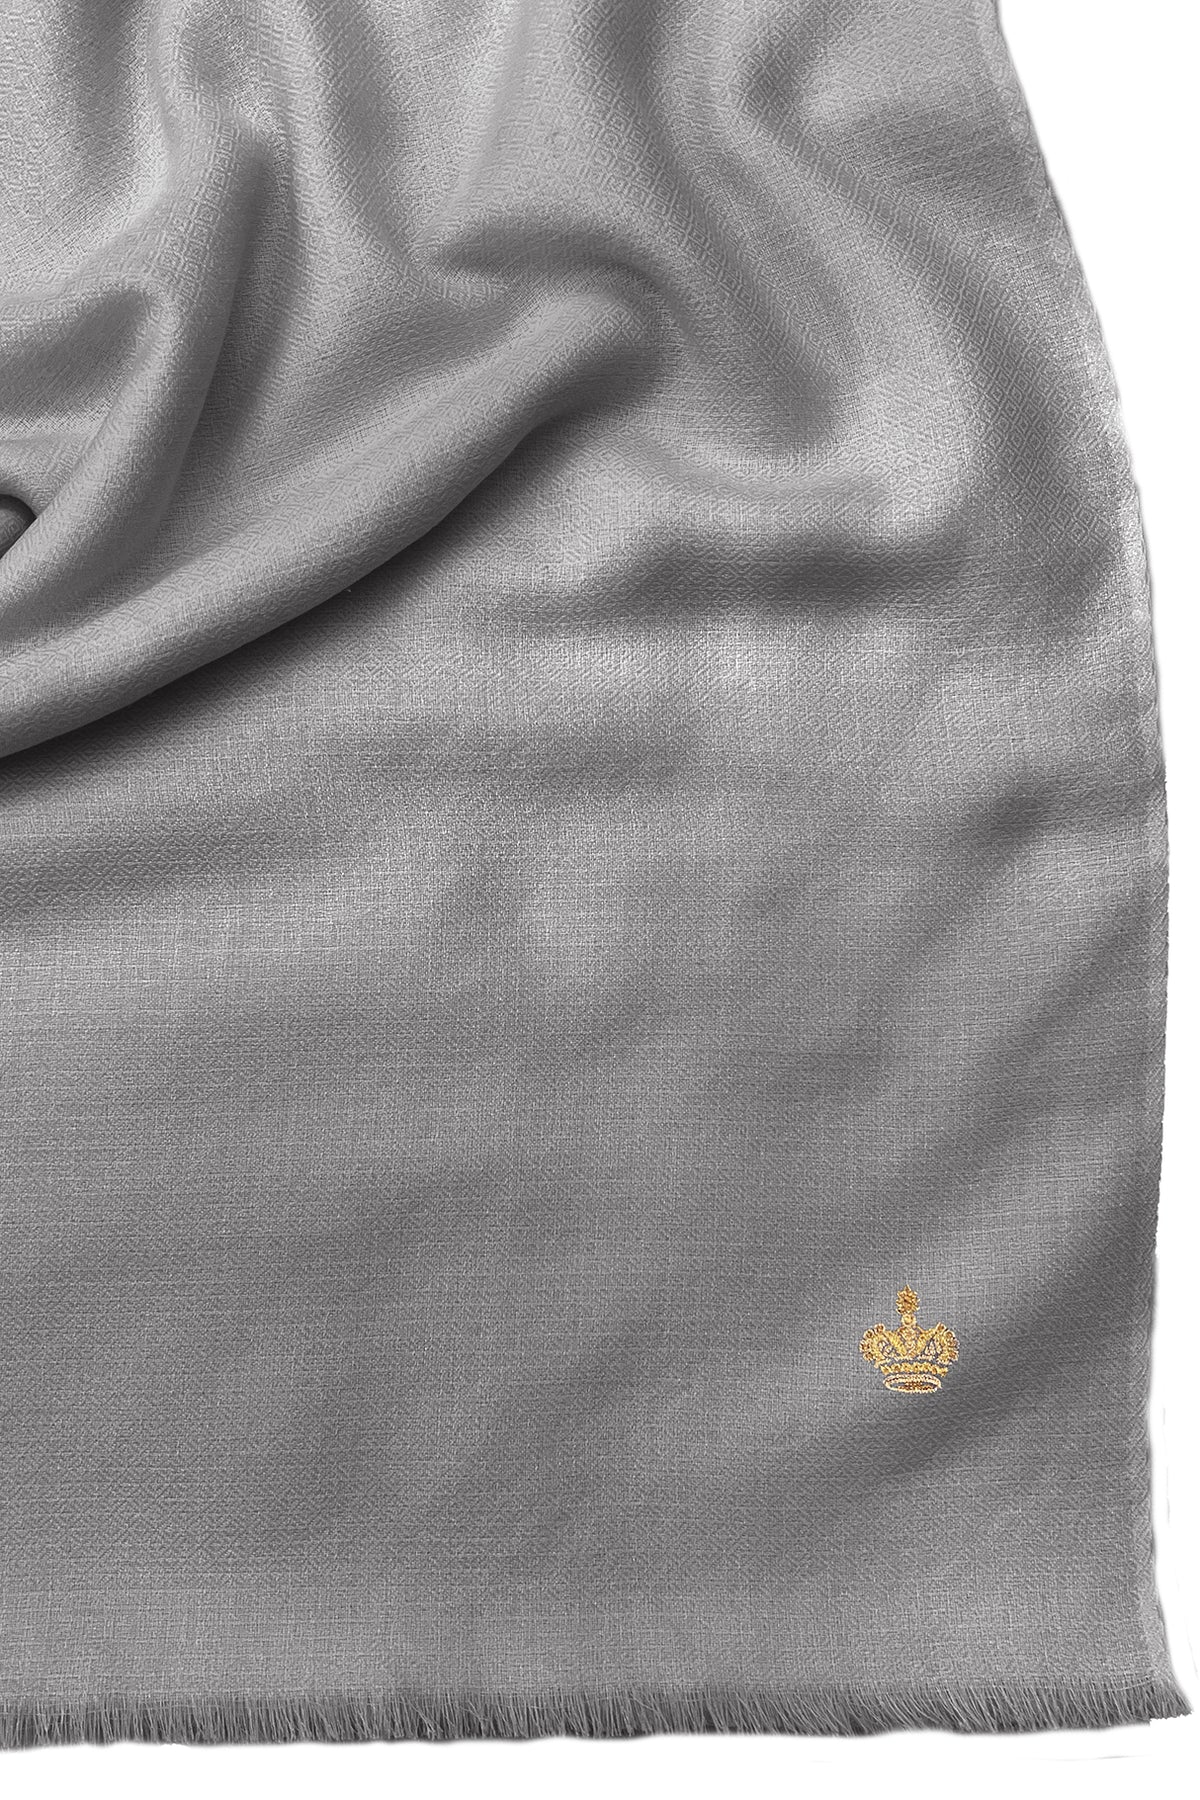 The Crown | Diamond Weave Wool Silk Personalized Stole